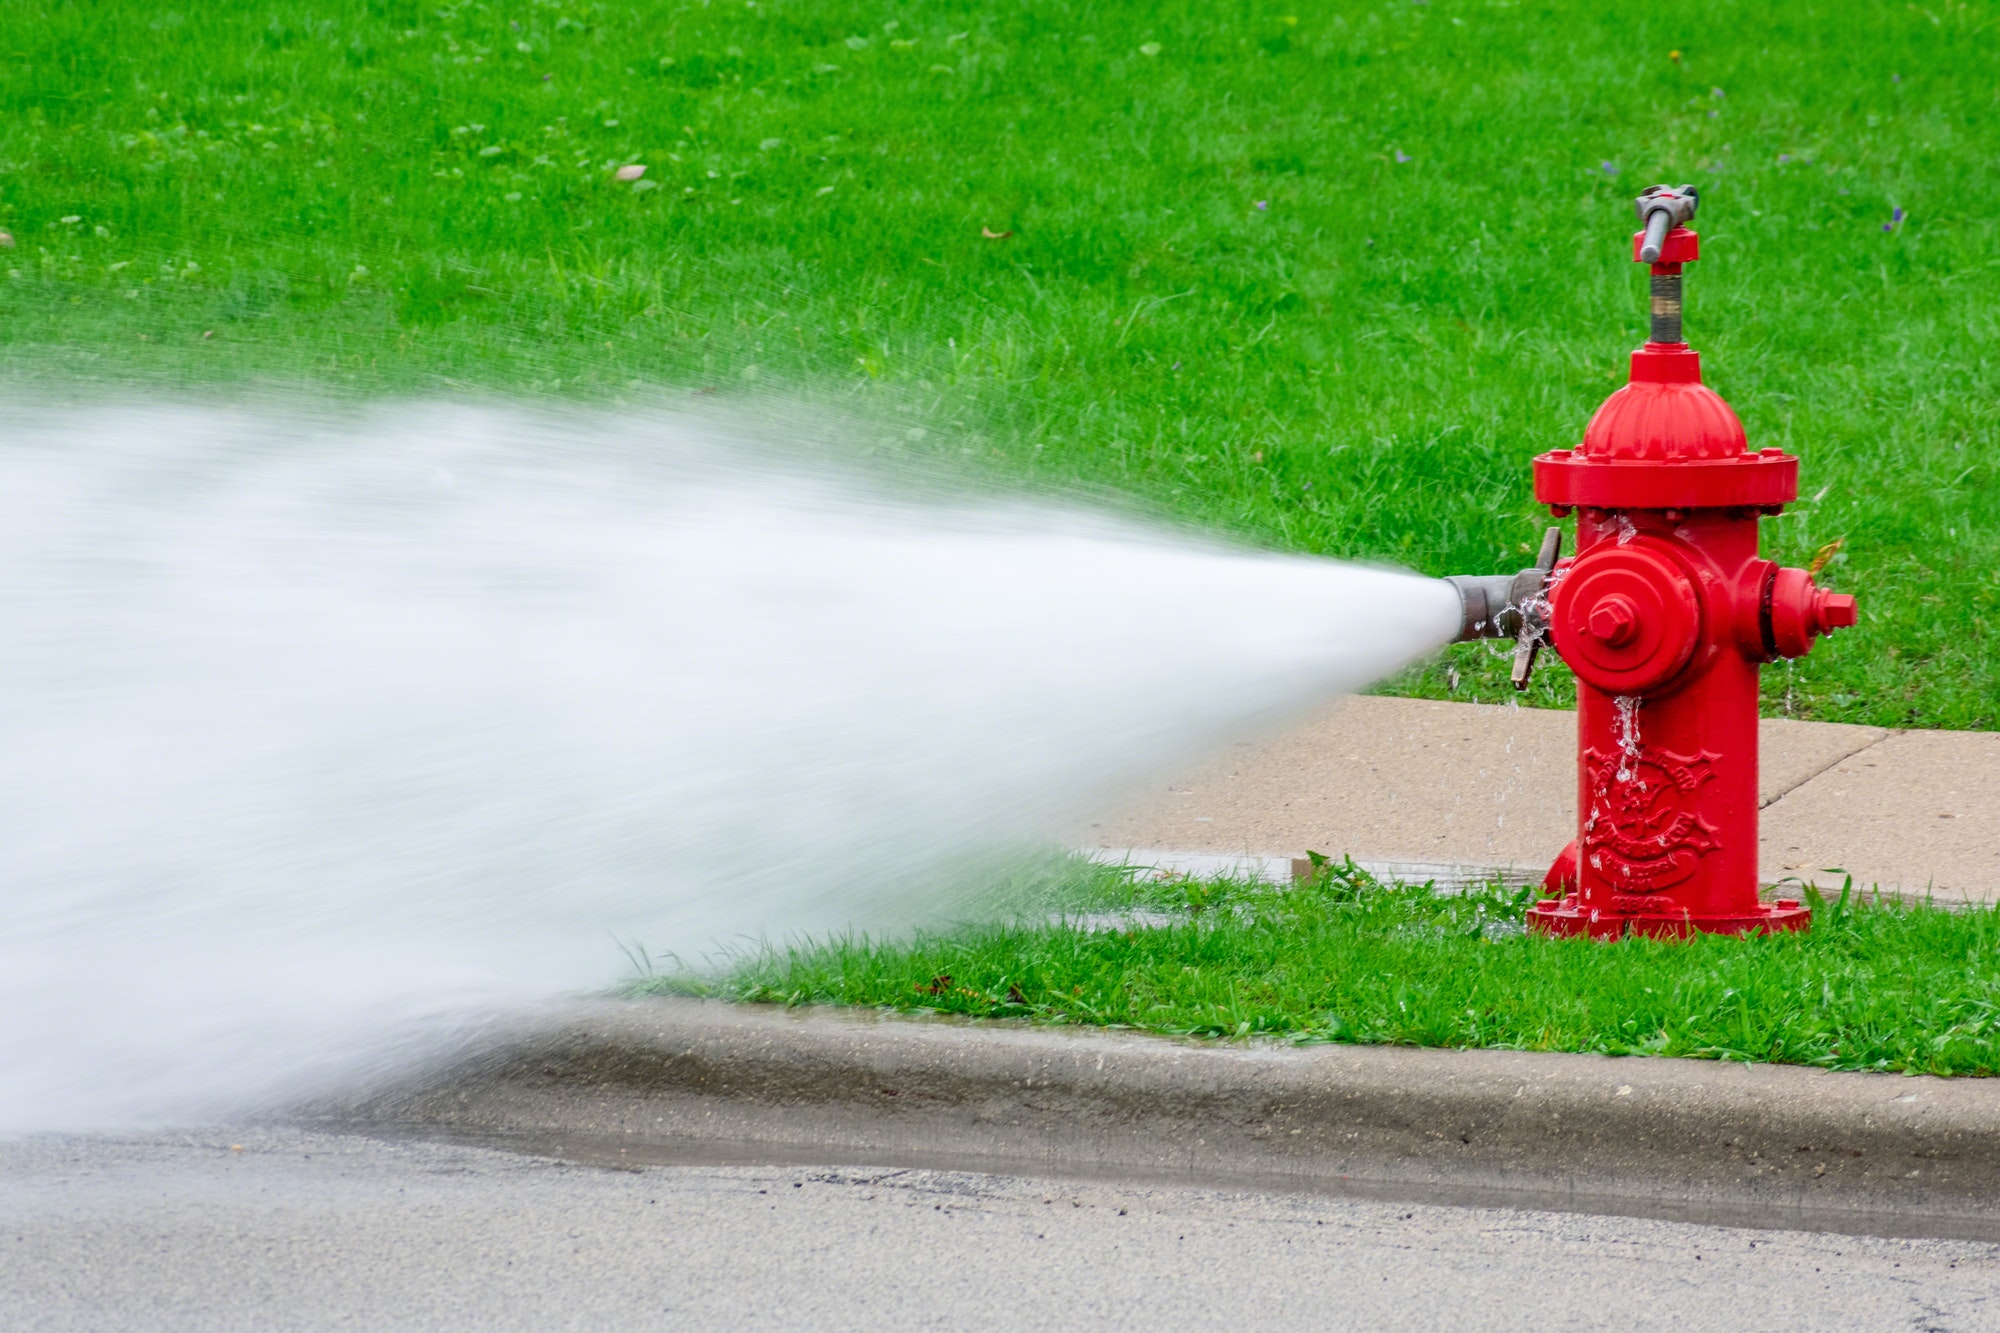 HYDRANT FLUSHING SCHEDULE